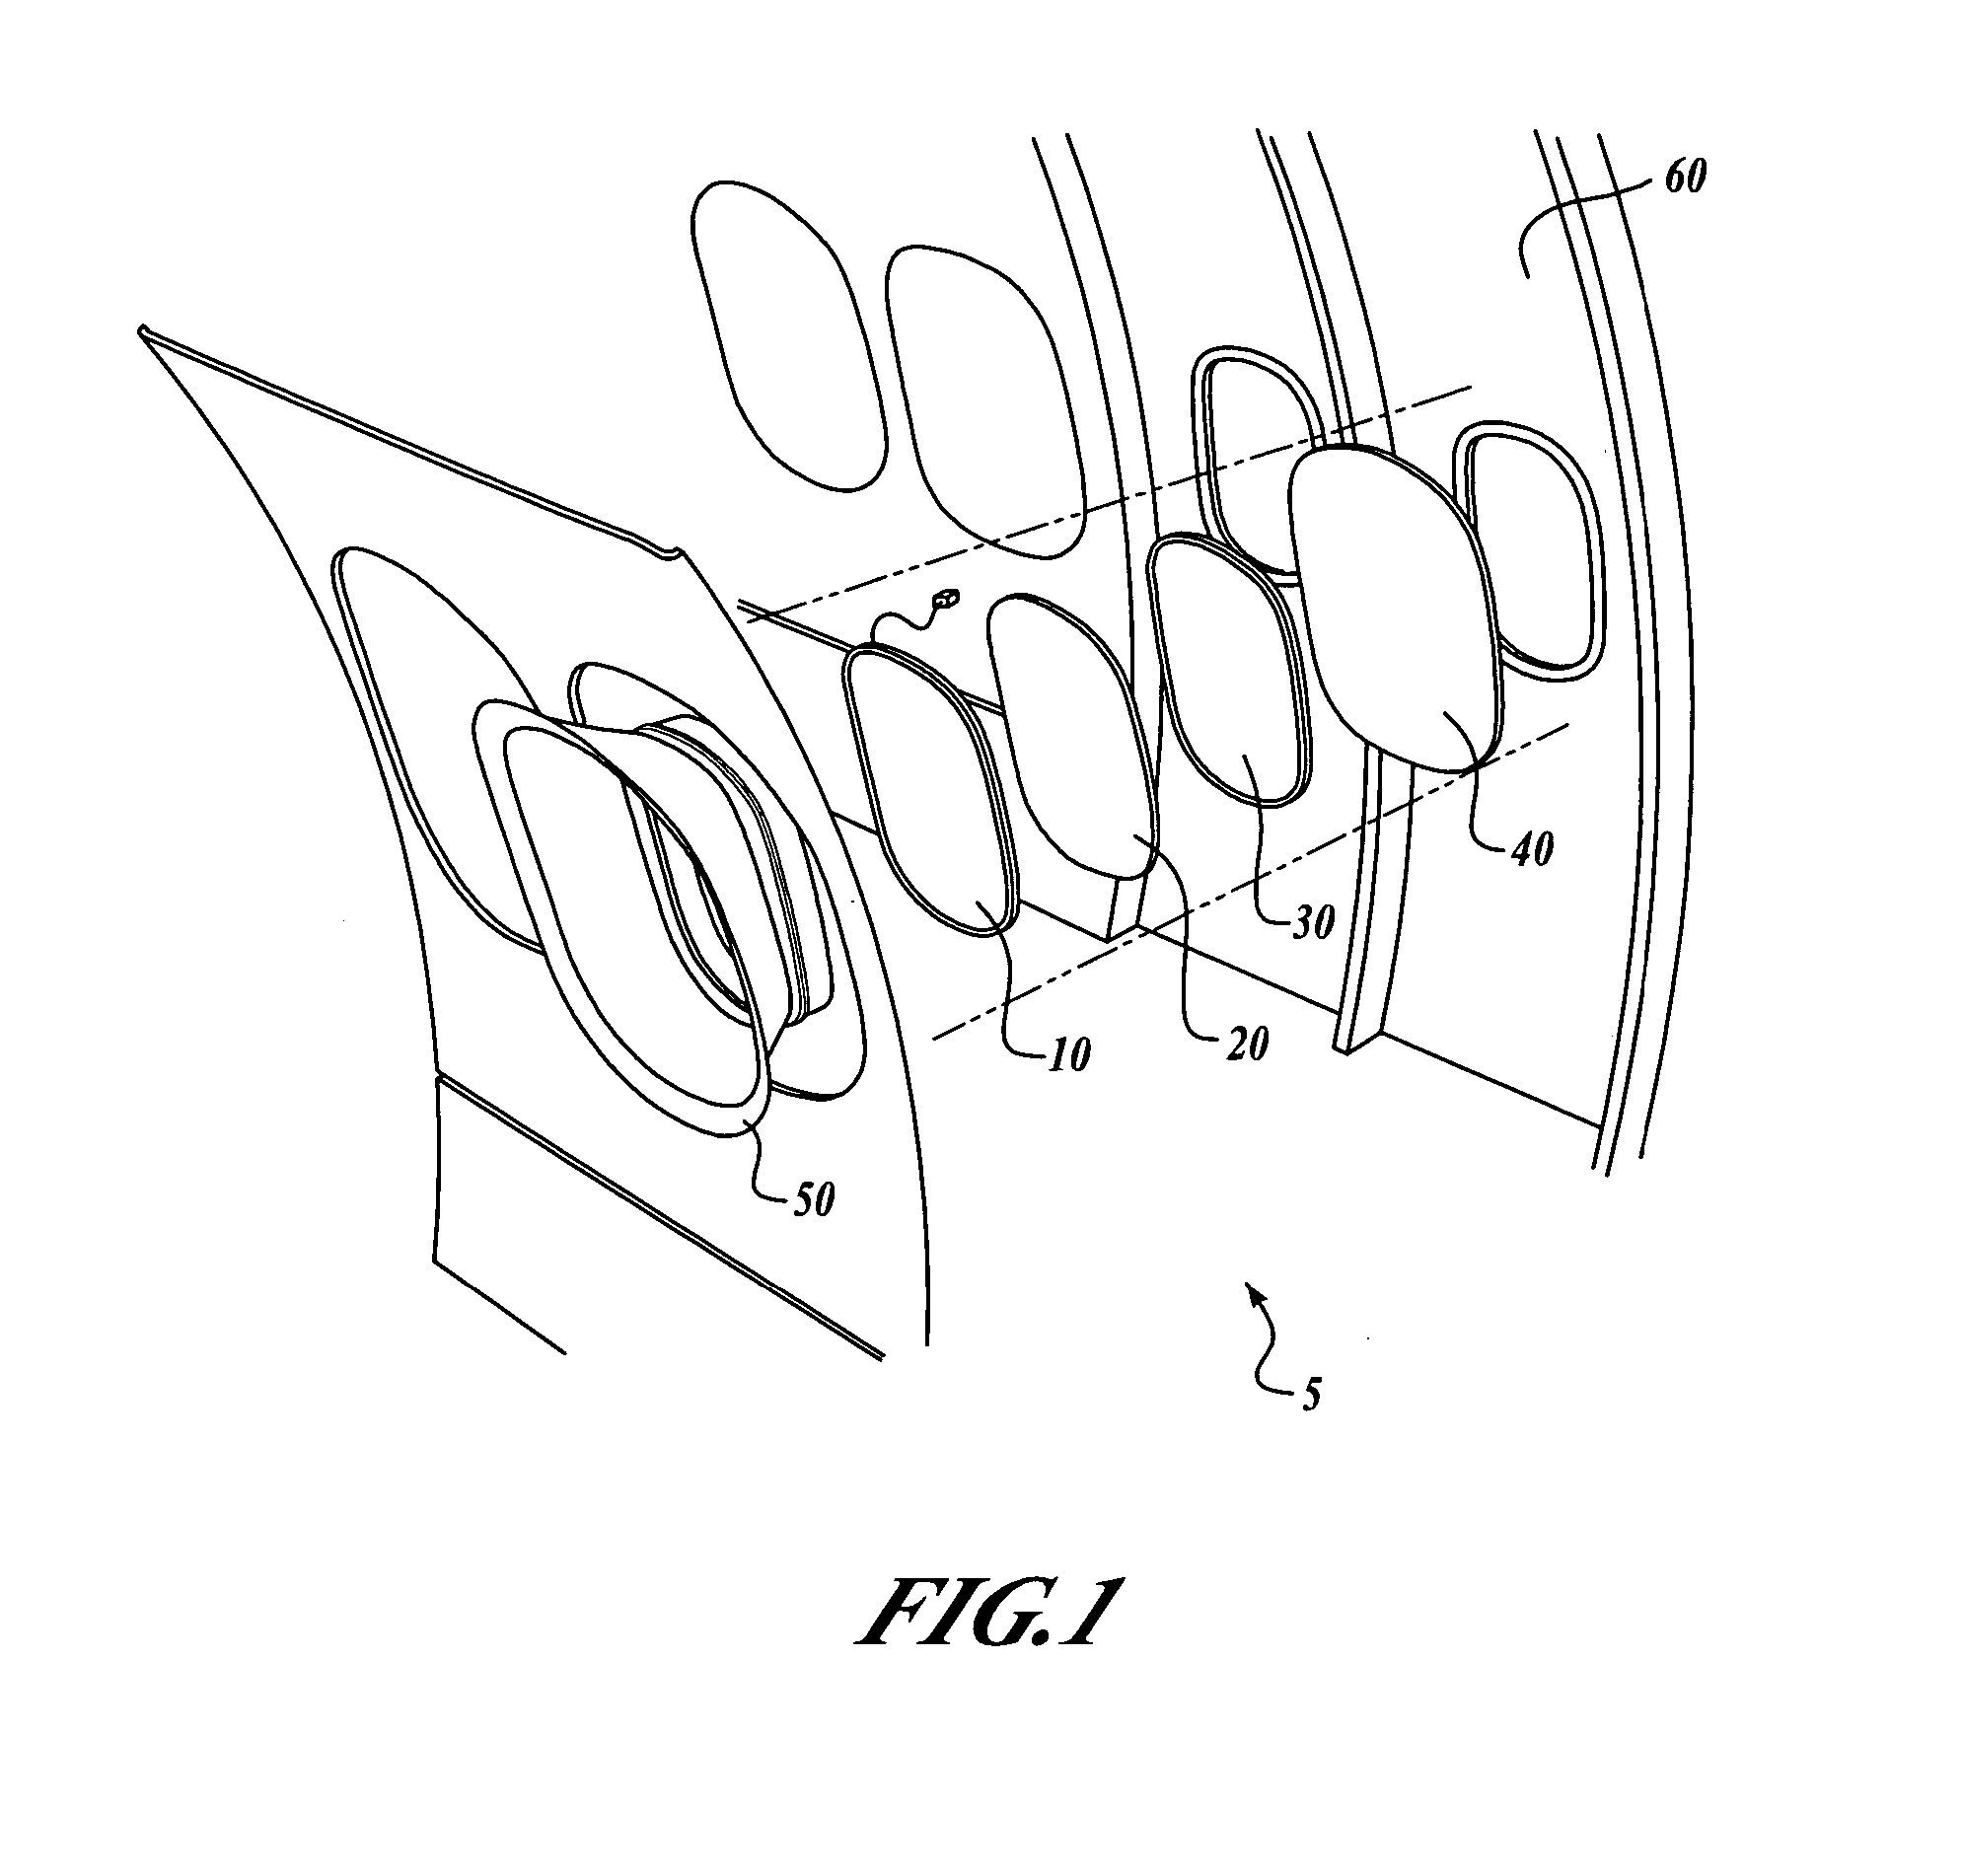 Multi-color electrochromic apparatus and methods